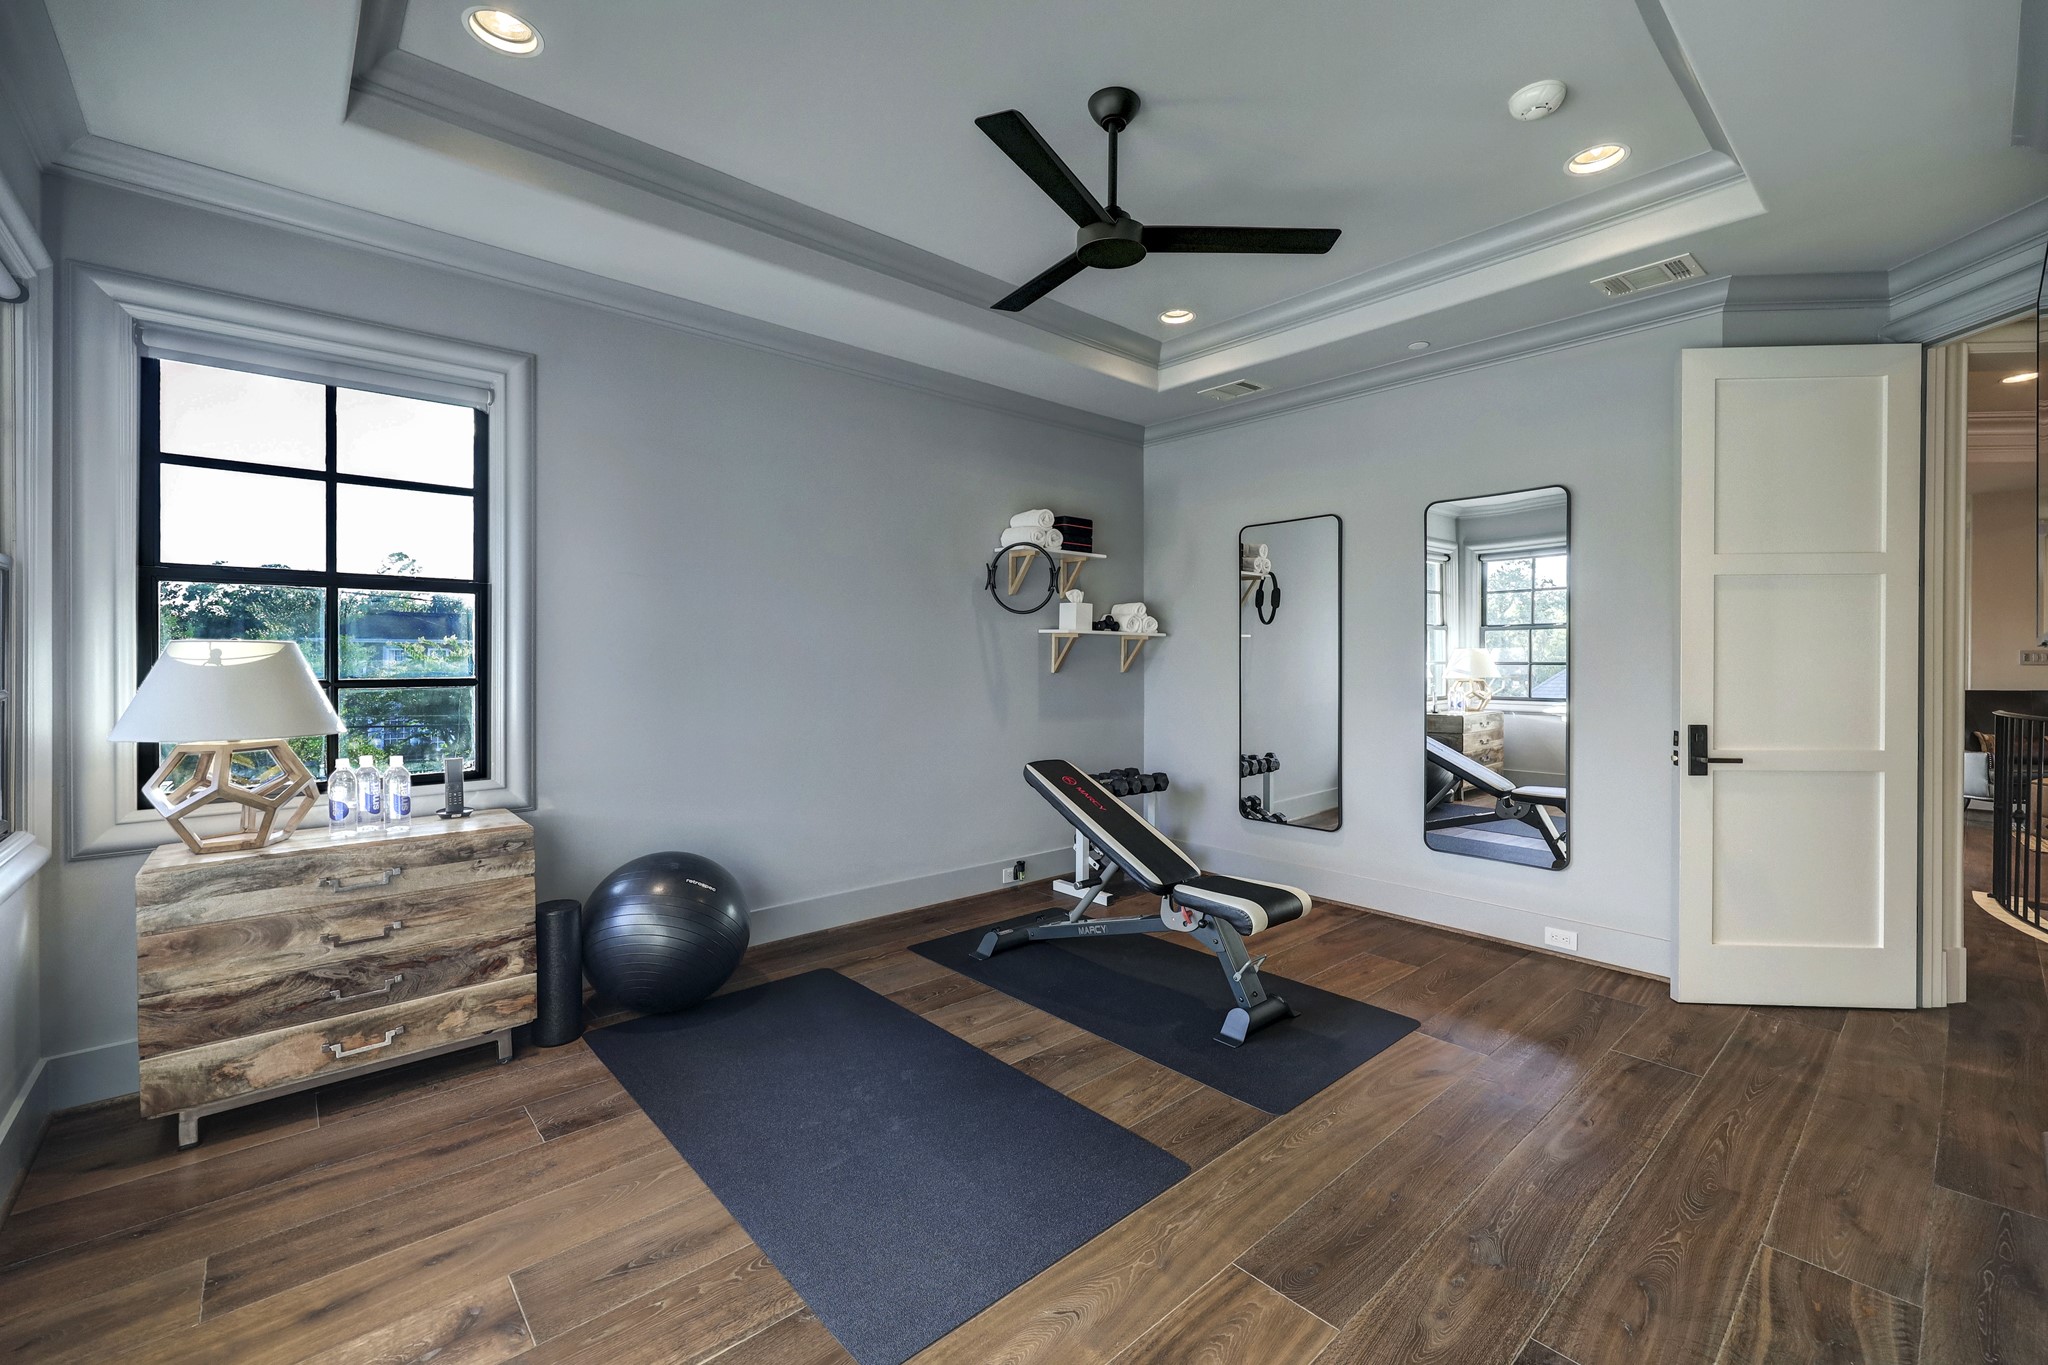 Currently used as a gym, this room has tall 10 foot tray ceilings and includes an en-suite bathroom.